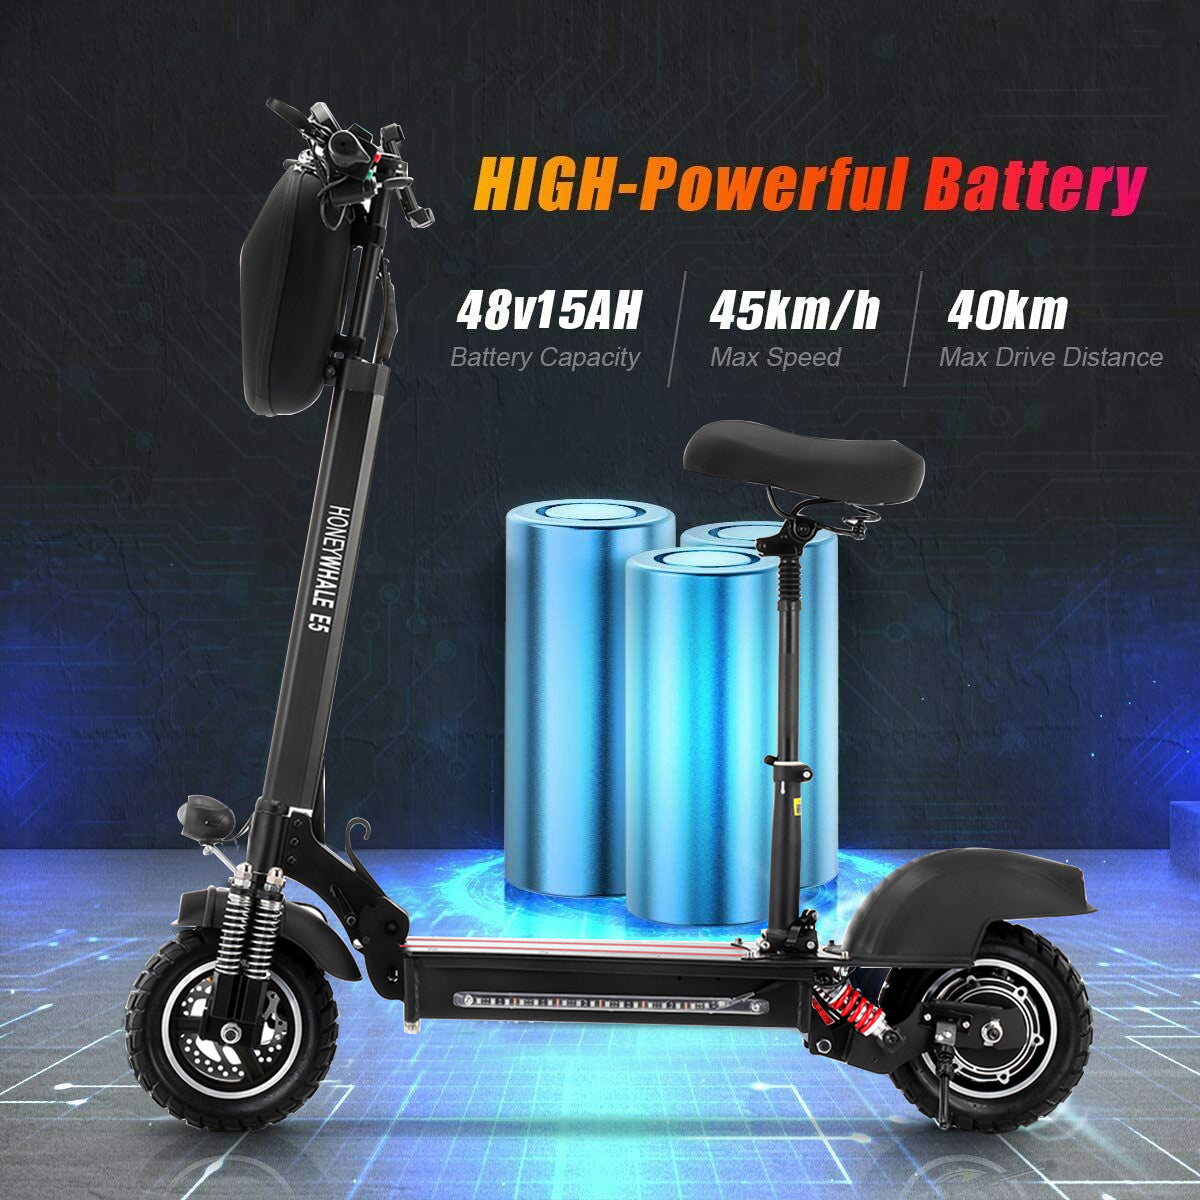 Off-load Electronic Scooter Electrique Adult Scooter 600w Electric Scooter EU UK No Tax Folding IP64 45km/h 15ah Ce 48V Iscooter baby magazin 